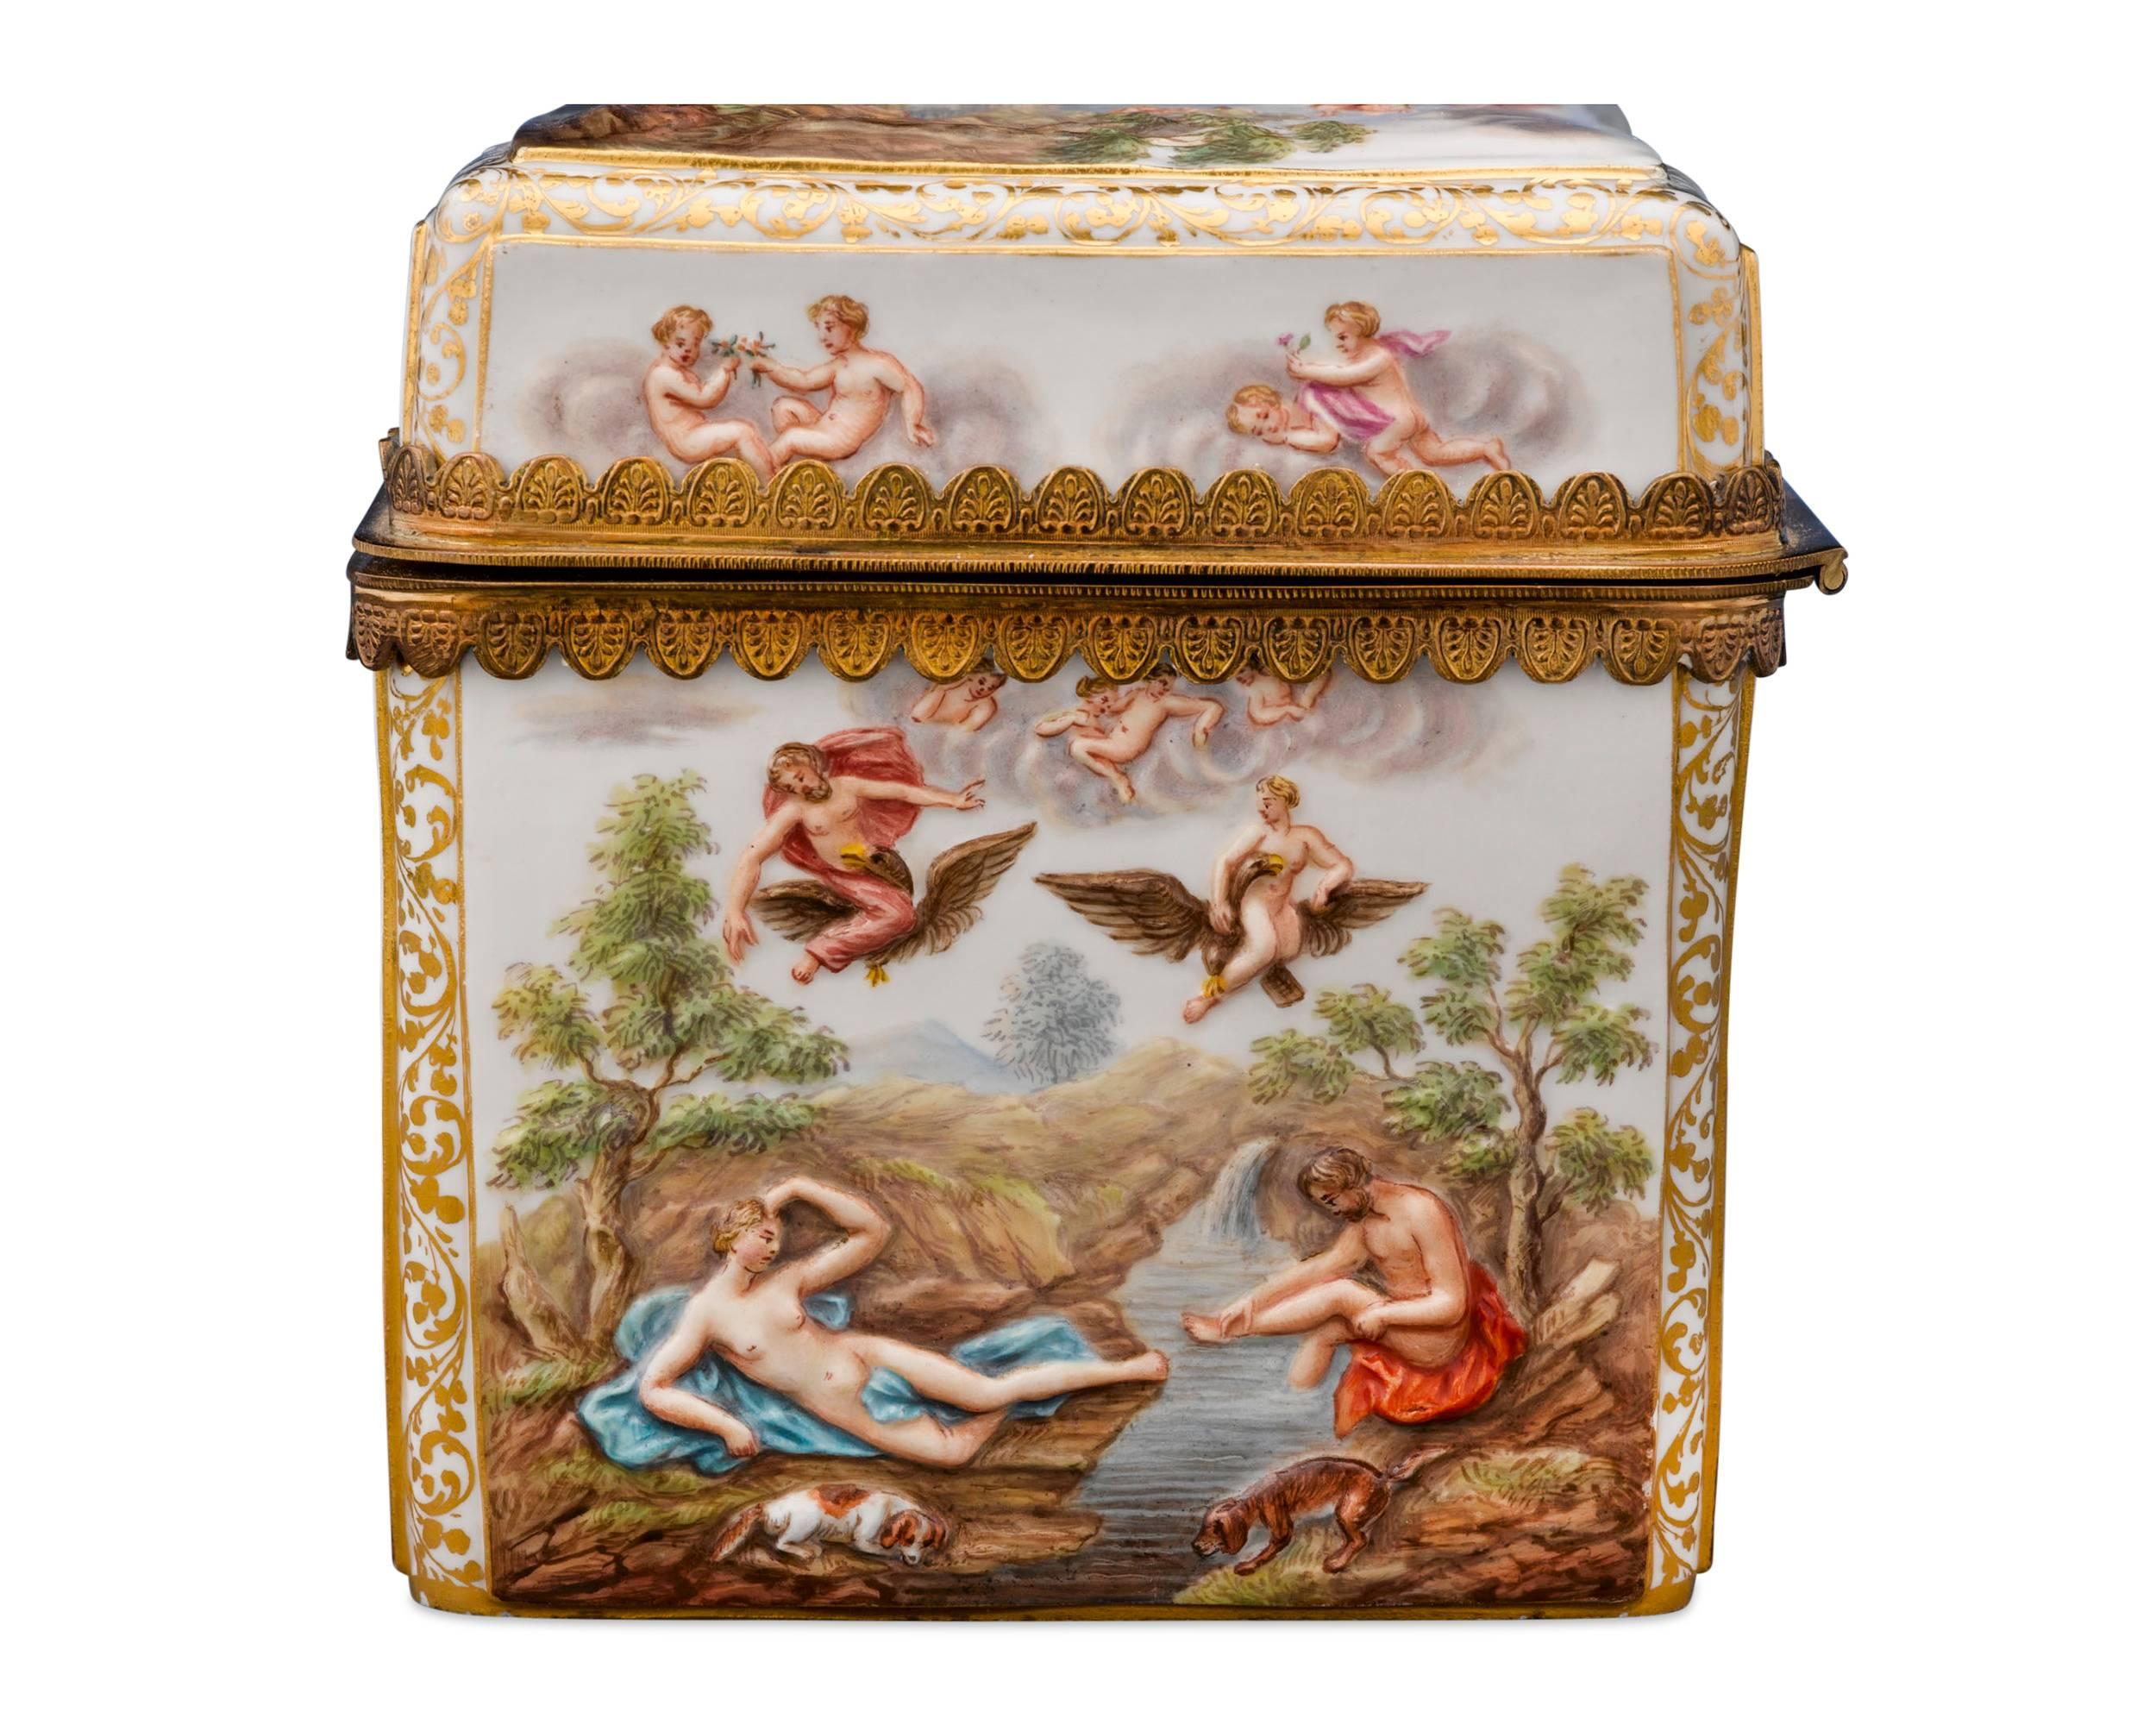 German 19th Century Porcelain Box with Fighting Scene by Meissen